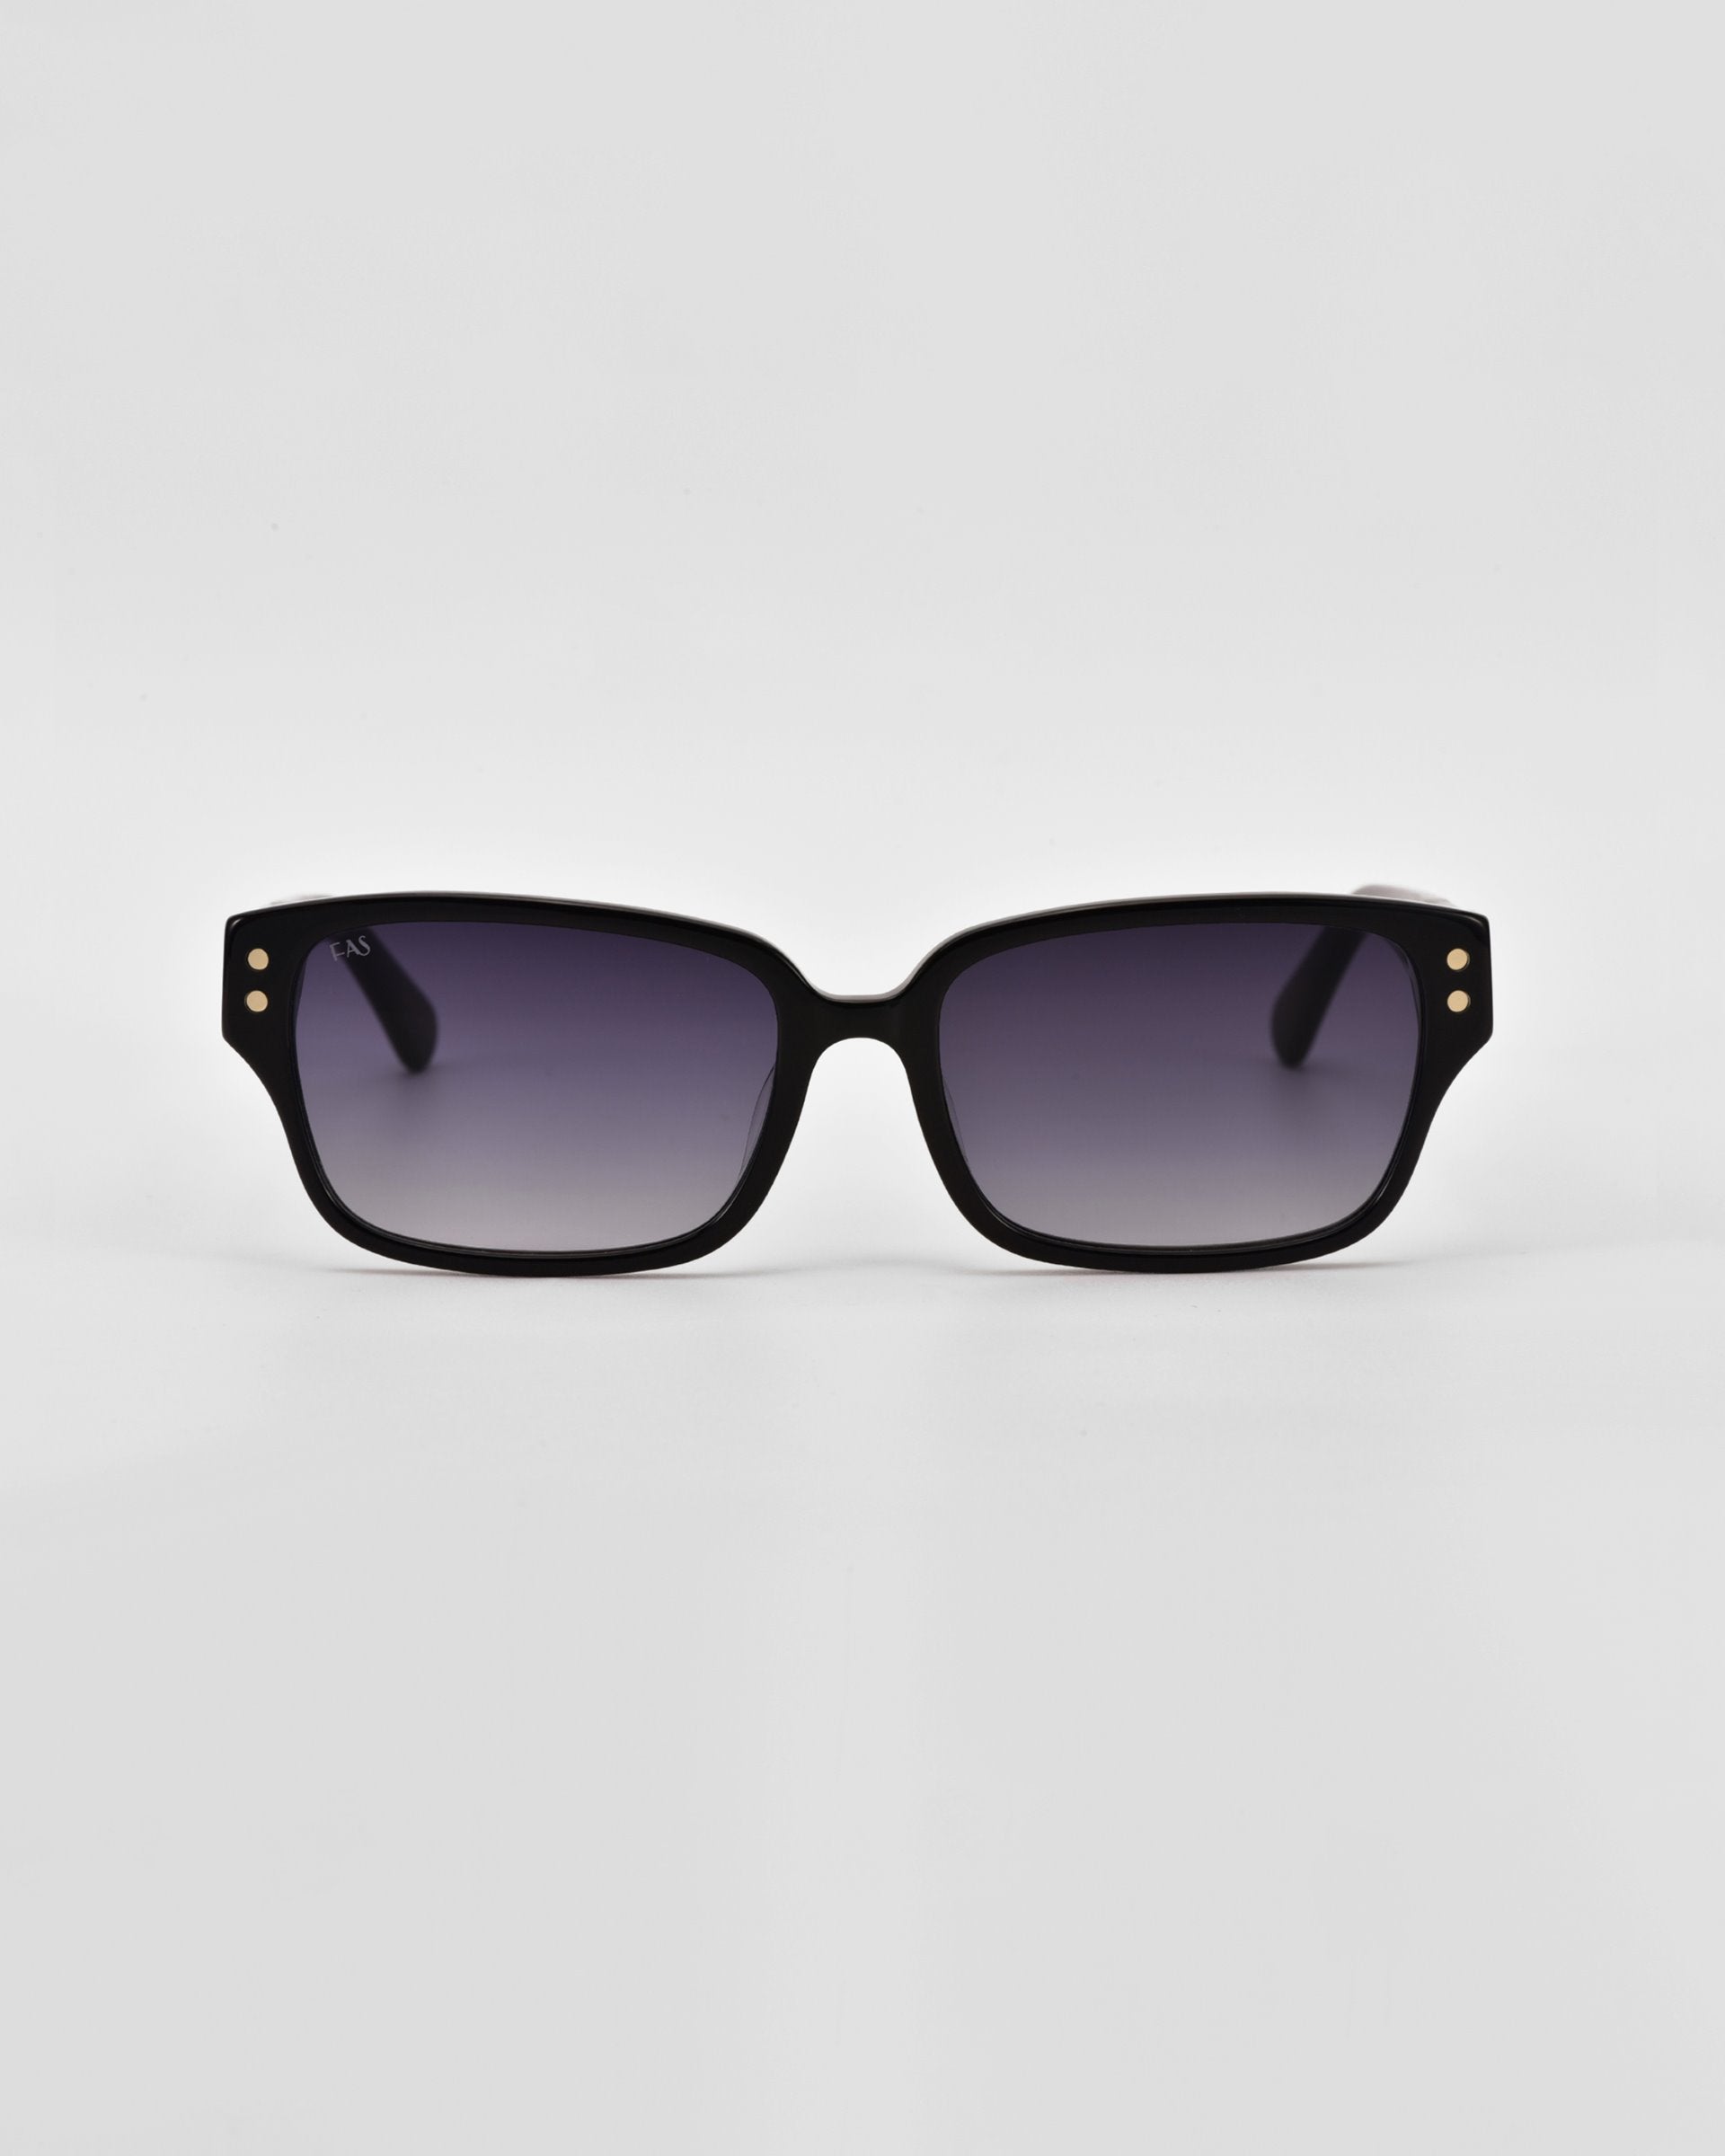 A pair of black rectangular Zenith sunglasses with gradient dark-to-light lenses. The handcrafted acetate frames feature two small gold-colored dots at the top corners of each lens. The background is plain white.

Product Name: Zenith
Brand Name: For Art&#39;s Sake®

Updated Sentence:
A pair of black rectangular For Art&#39;s Sake® Zenith sunglasses with gradient dark-to-light lenses. The handcrafted acetate frames feature two small gold-colored dots at the top corners of each lens. The background is plain white.